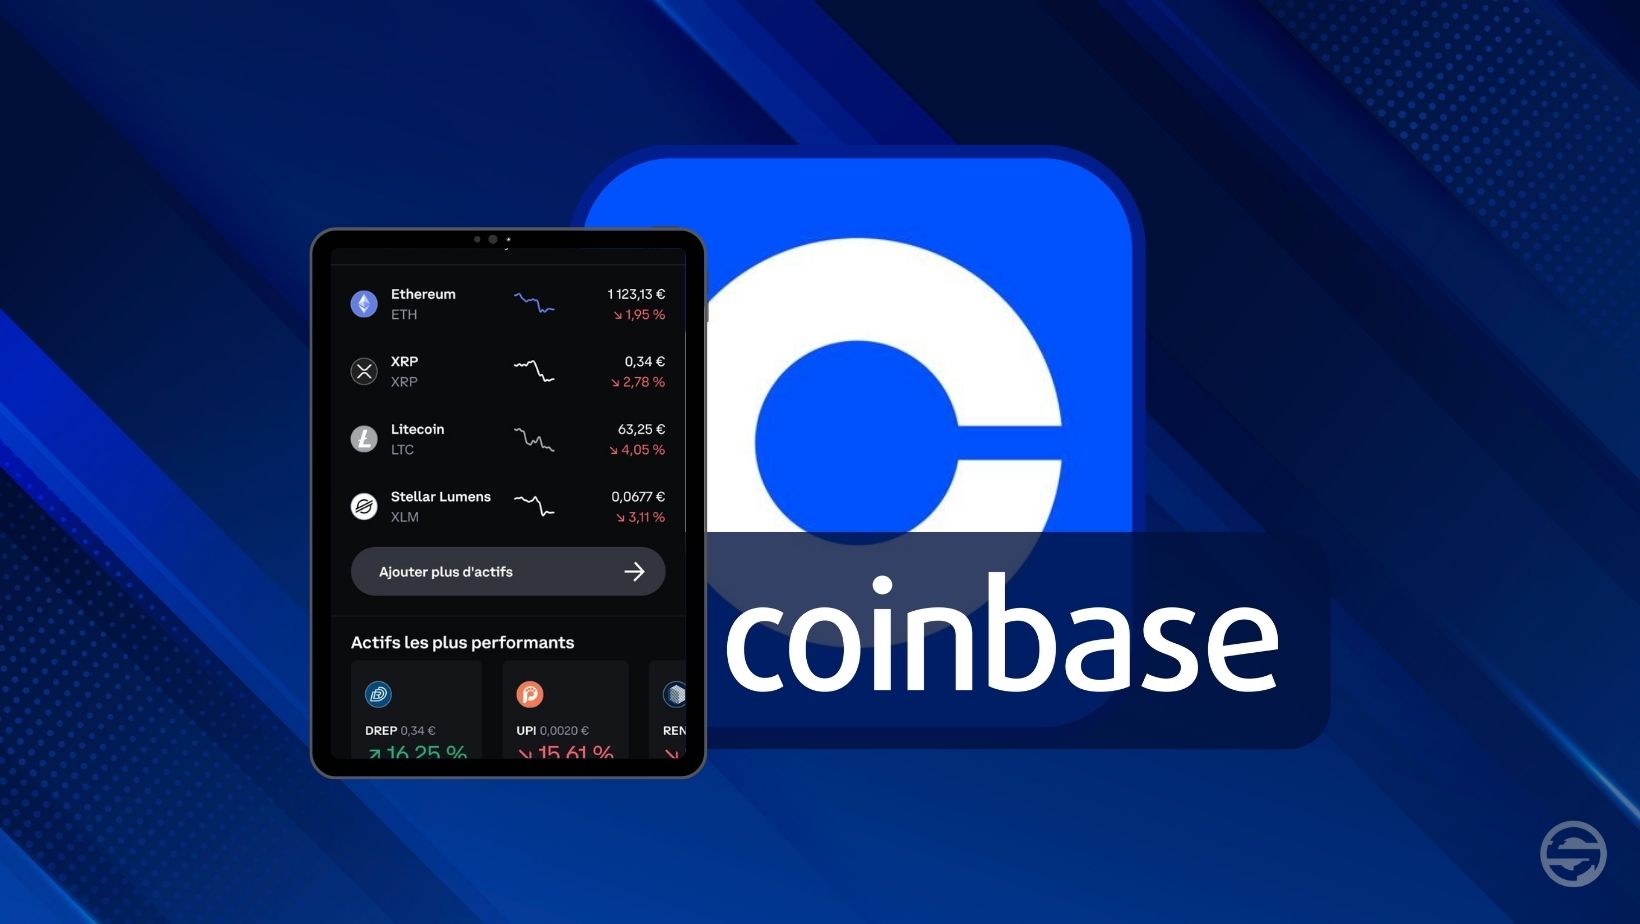 How to register on Coinbase quickly?